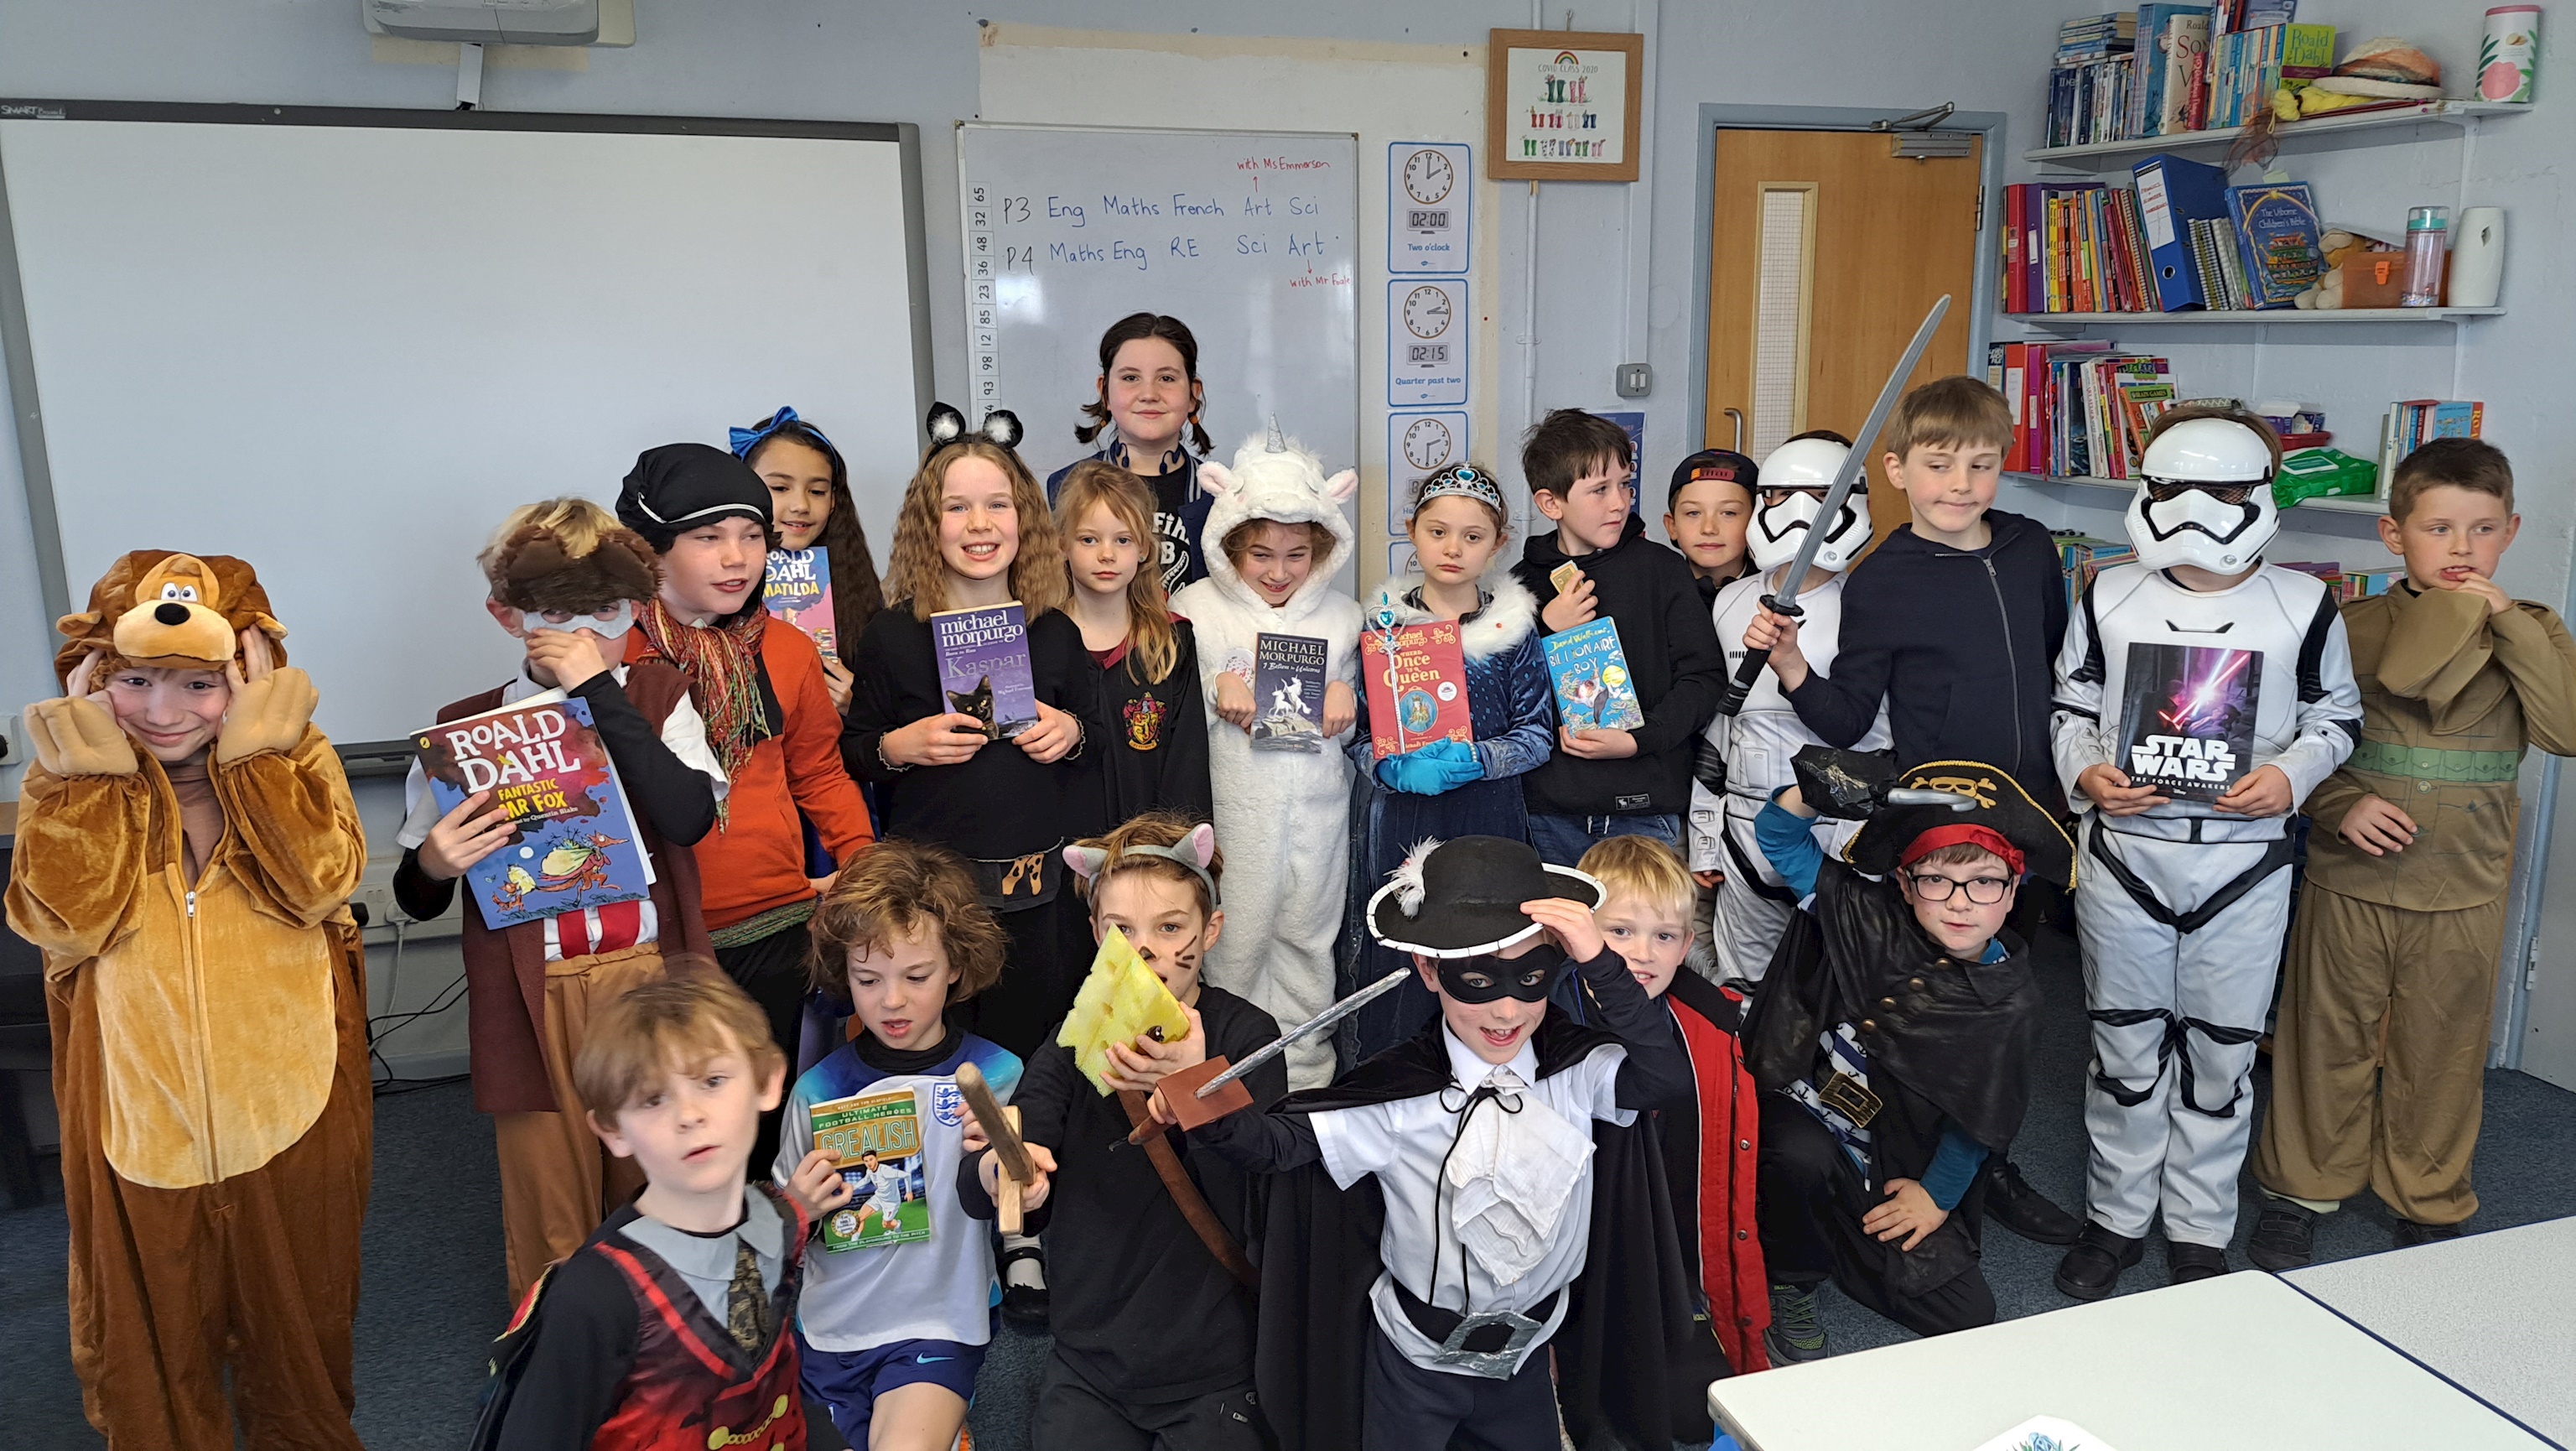 World Book Day celebrated in style!